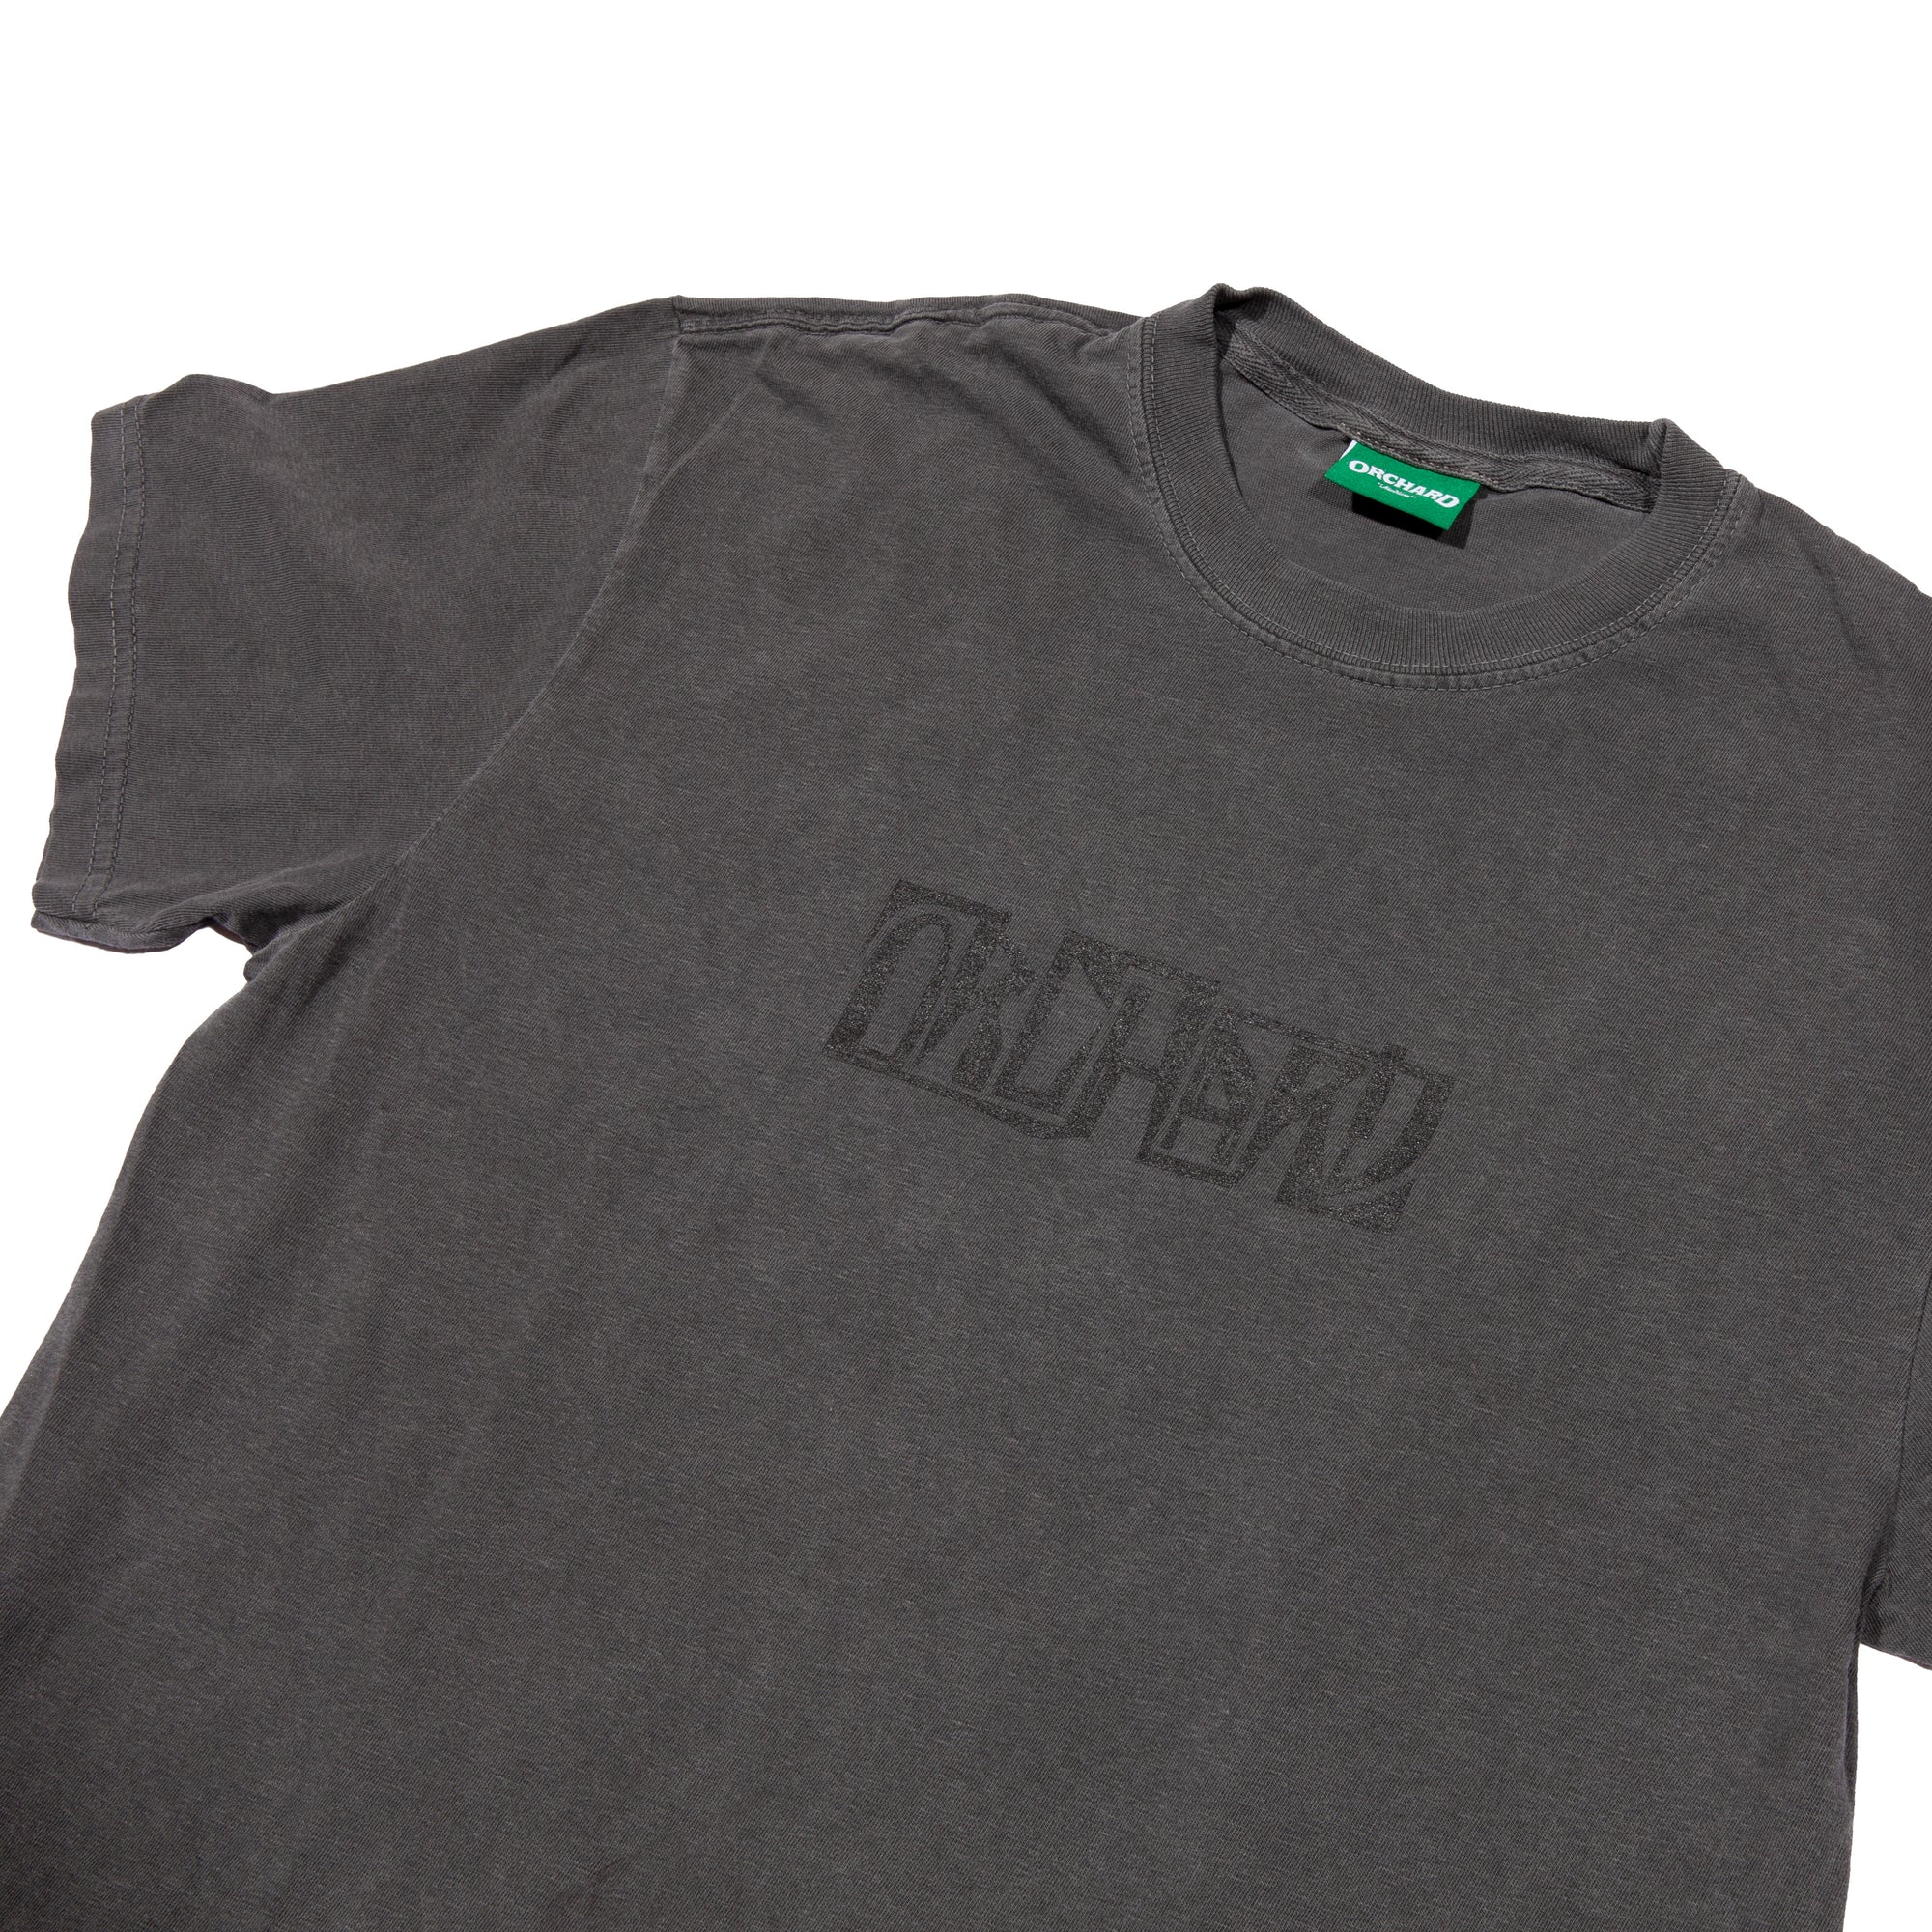 Orchard Tribe Tee Pepper Garment Dyed